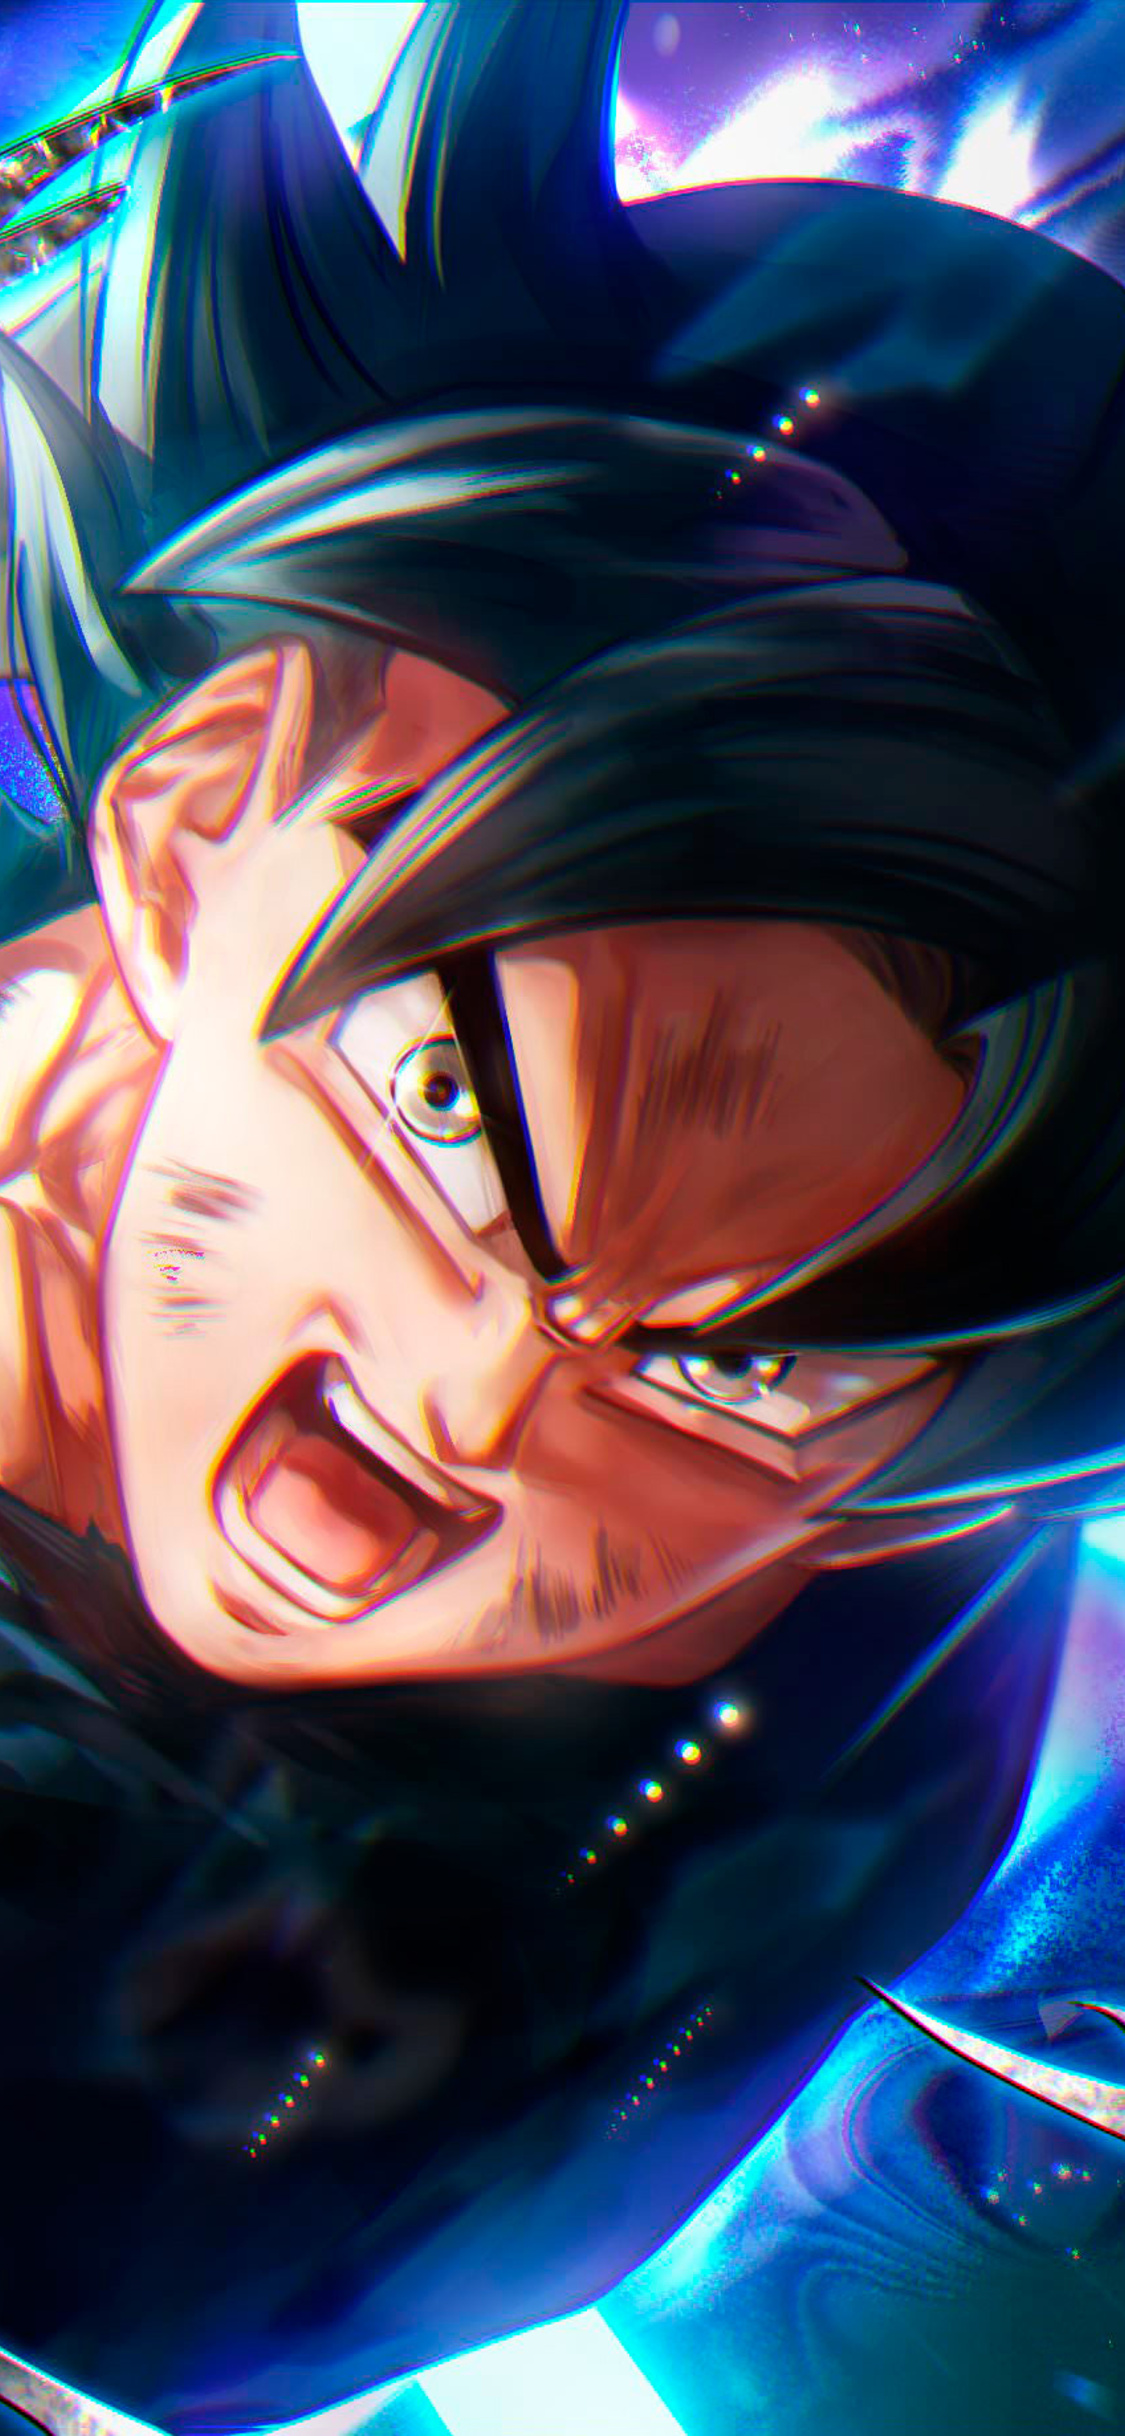 Goku In Dragon Ball Super Anime 4k iPhone XS, iPhone iPhone X HD 4k Wallpaper, Image, Background, Photo and Picture